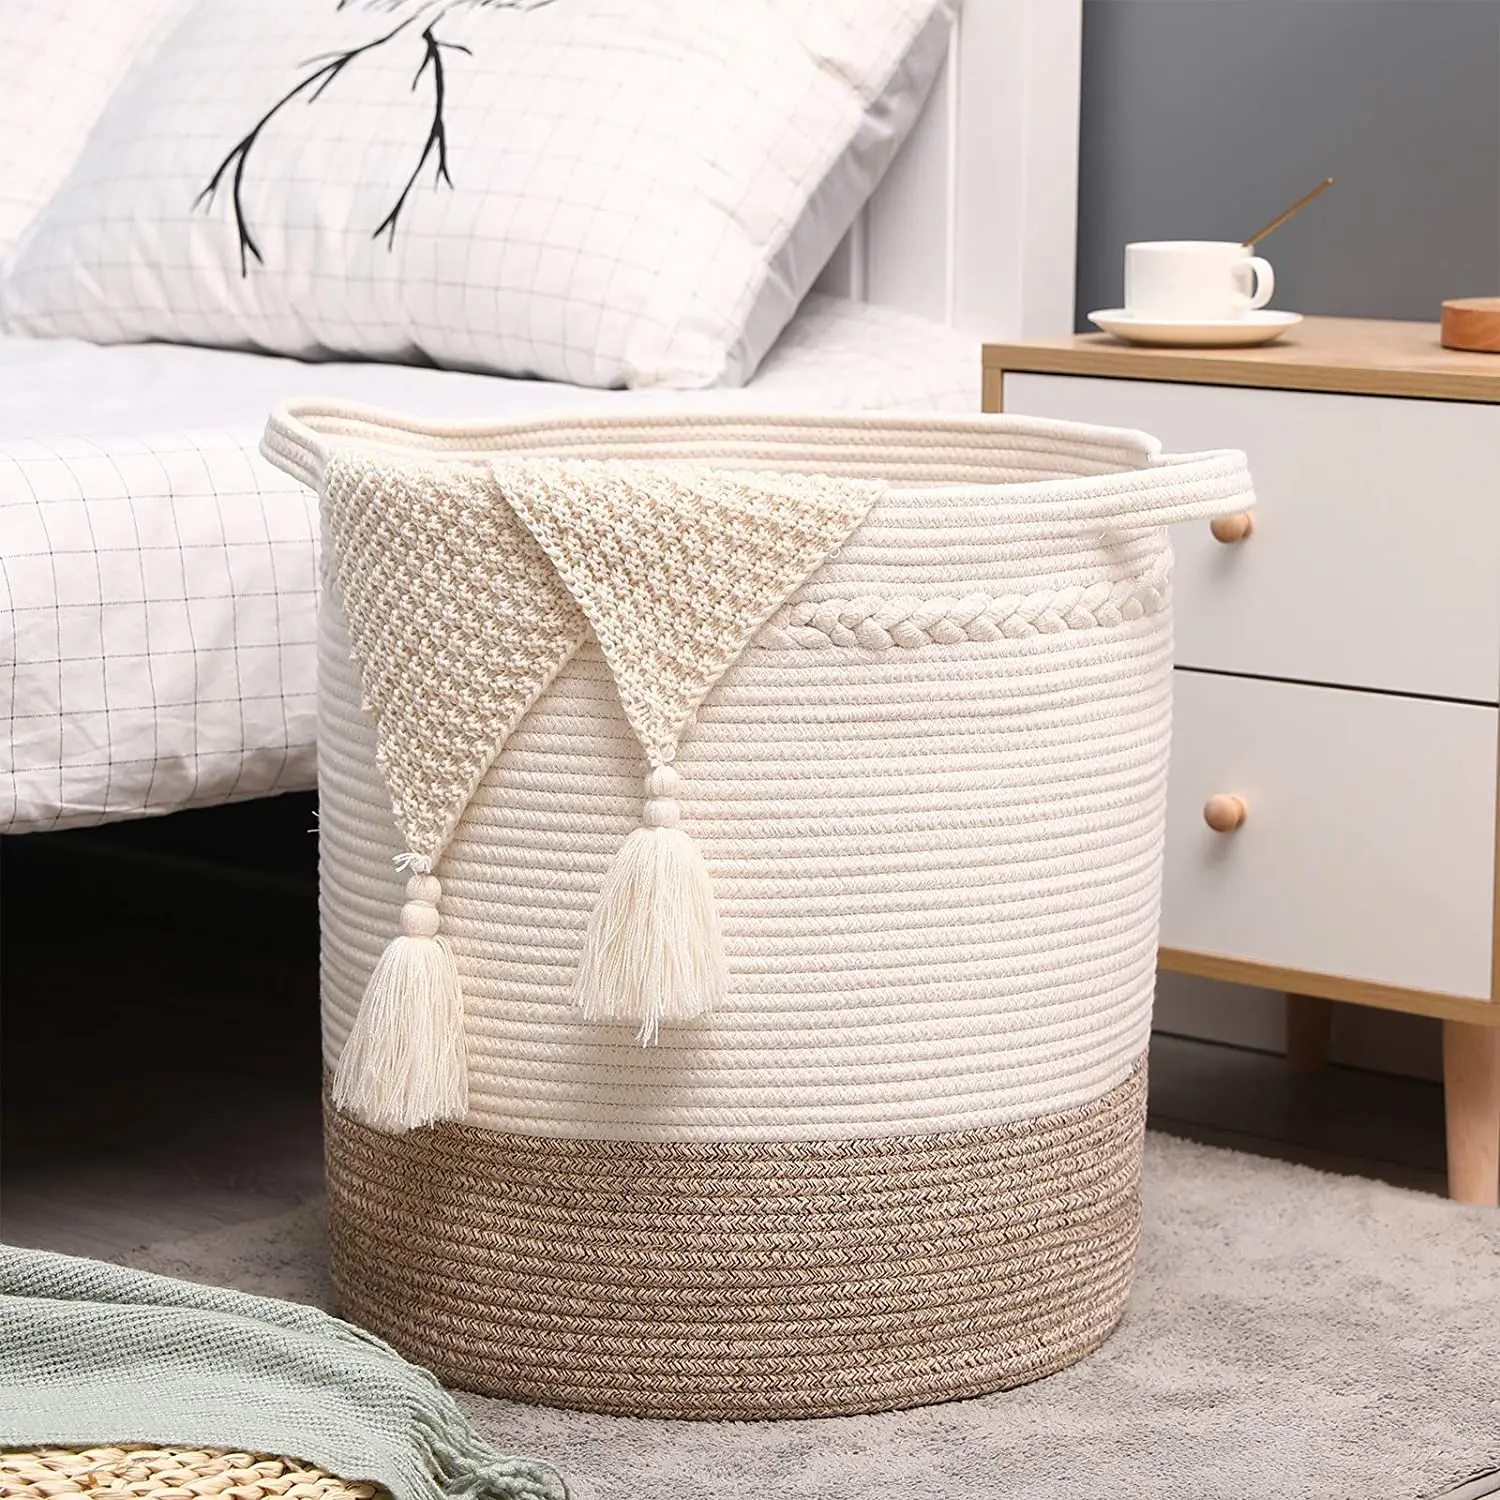 Sheets Clothes Toys Pets Towels. Foldable Laundry Baskets Cotton rope Handles Nursery Dirty Clothes Baskets Bedrooms Suitable For Children VOOMOLOVE Storage Baskets 